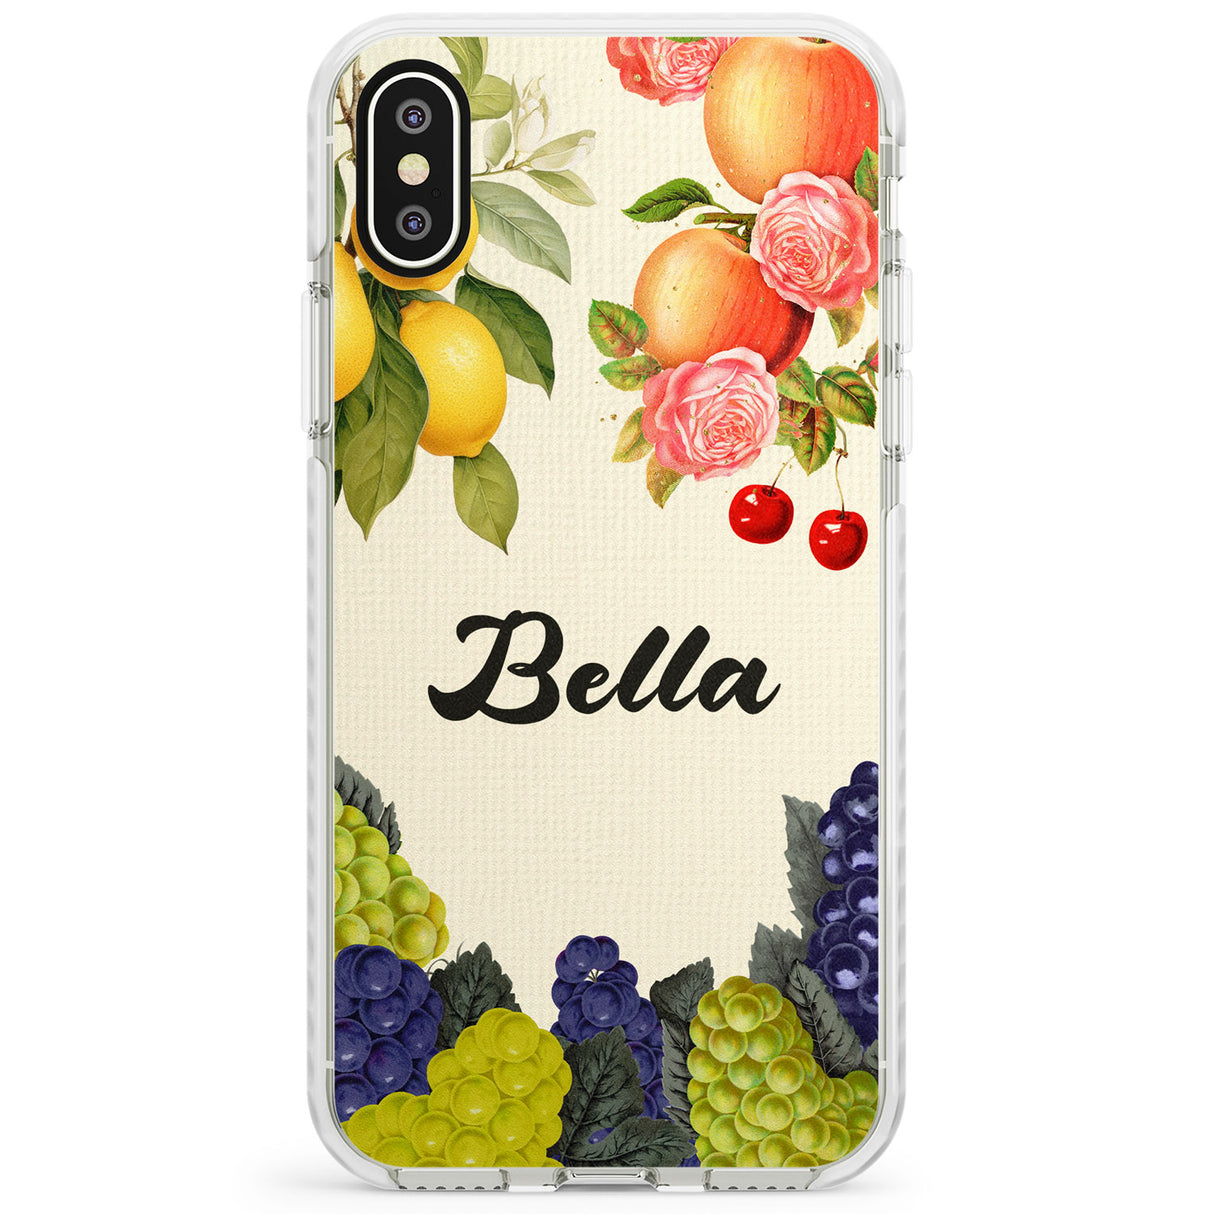 Personalised Vintage Fruits Impact Phone Case for iPhone X XS Max XR